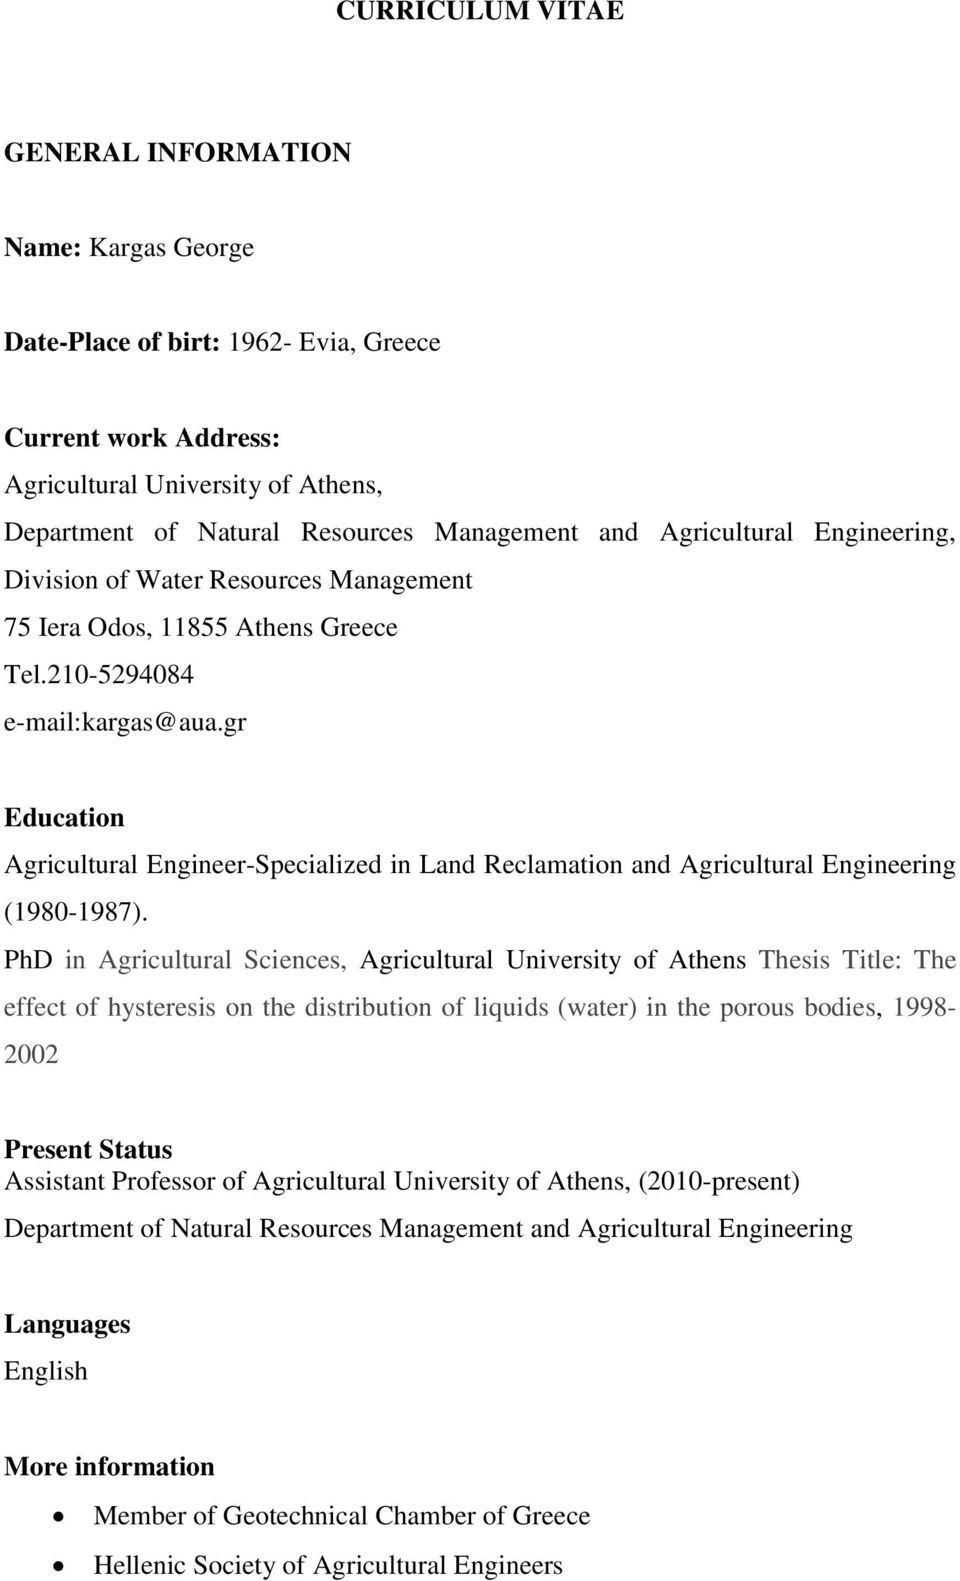 gr Education Agricultural Engineer-Specialized in Land Reclamation and Agricultural Engineering (1980-1987).